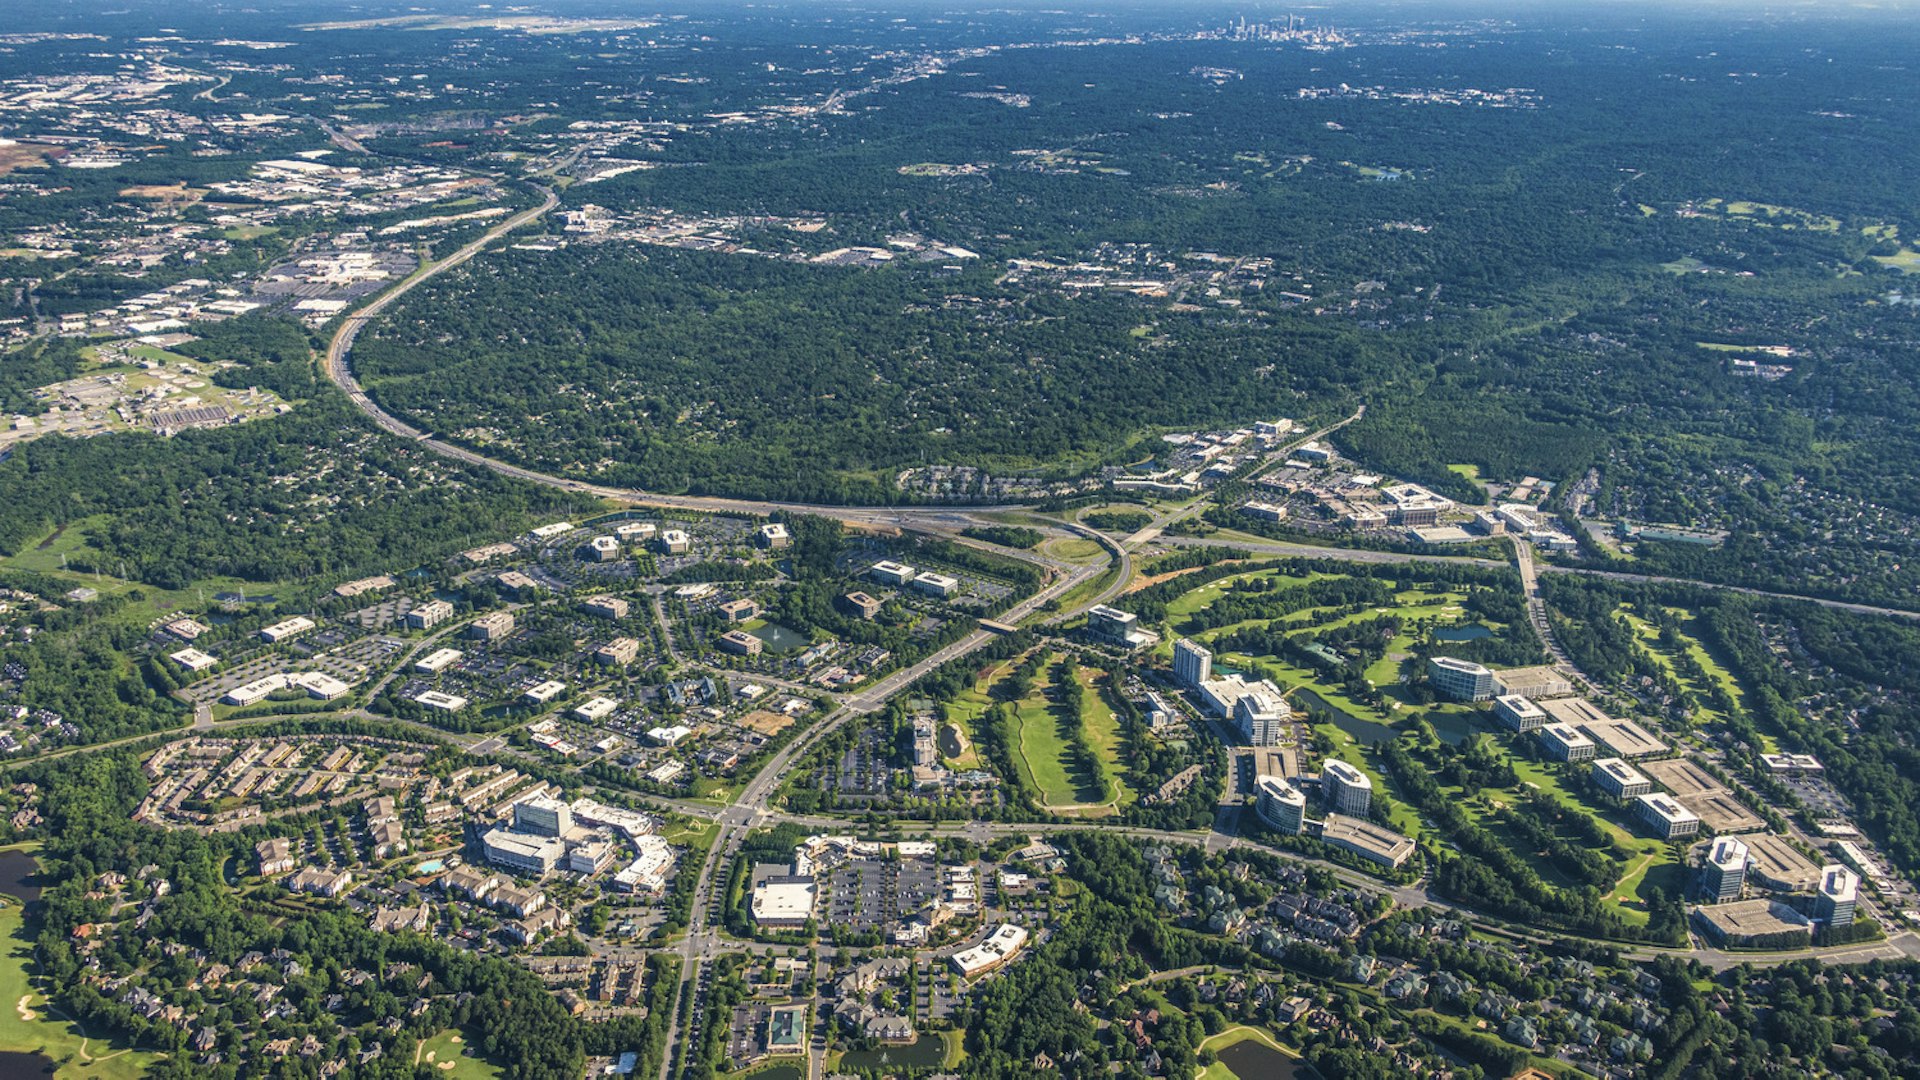 Aerial drone photo of Ballantyne Campus and South Charlotte area